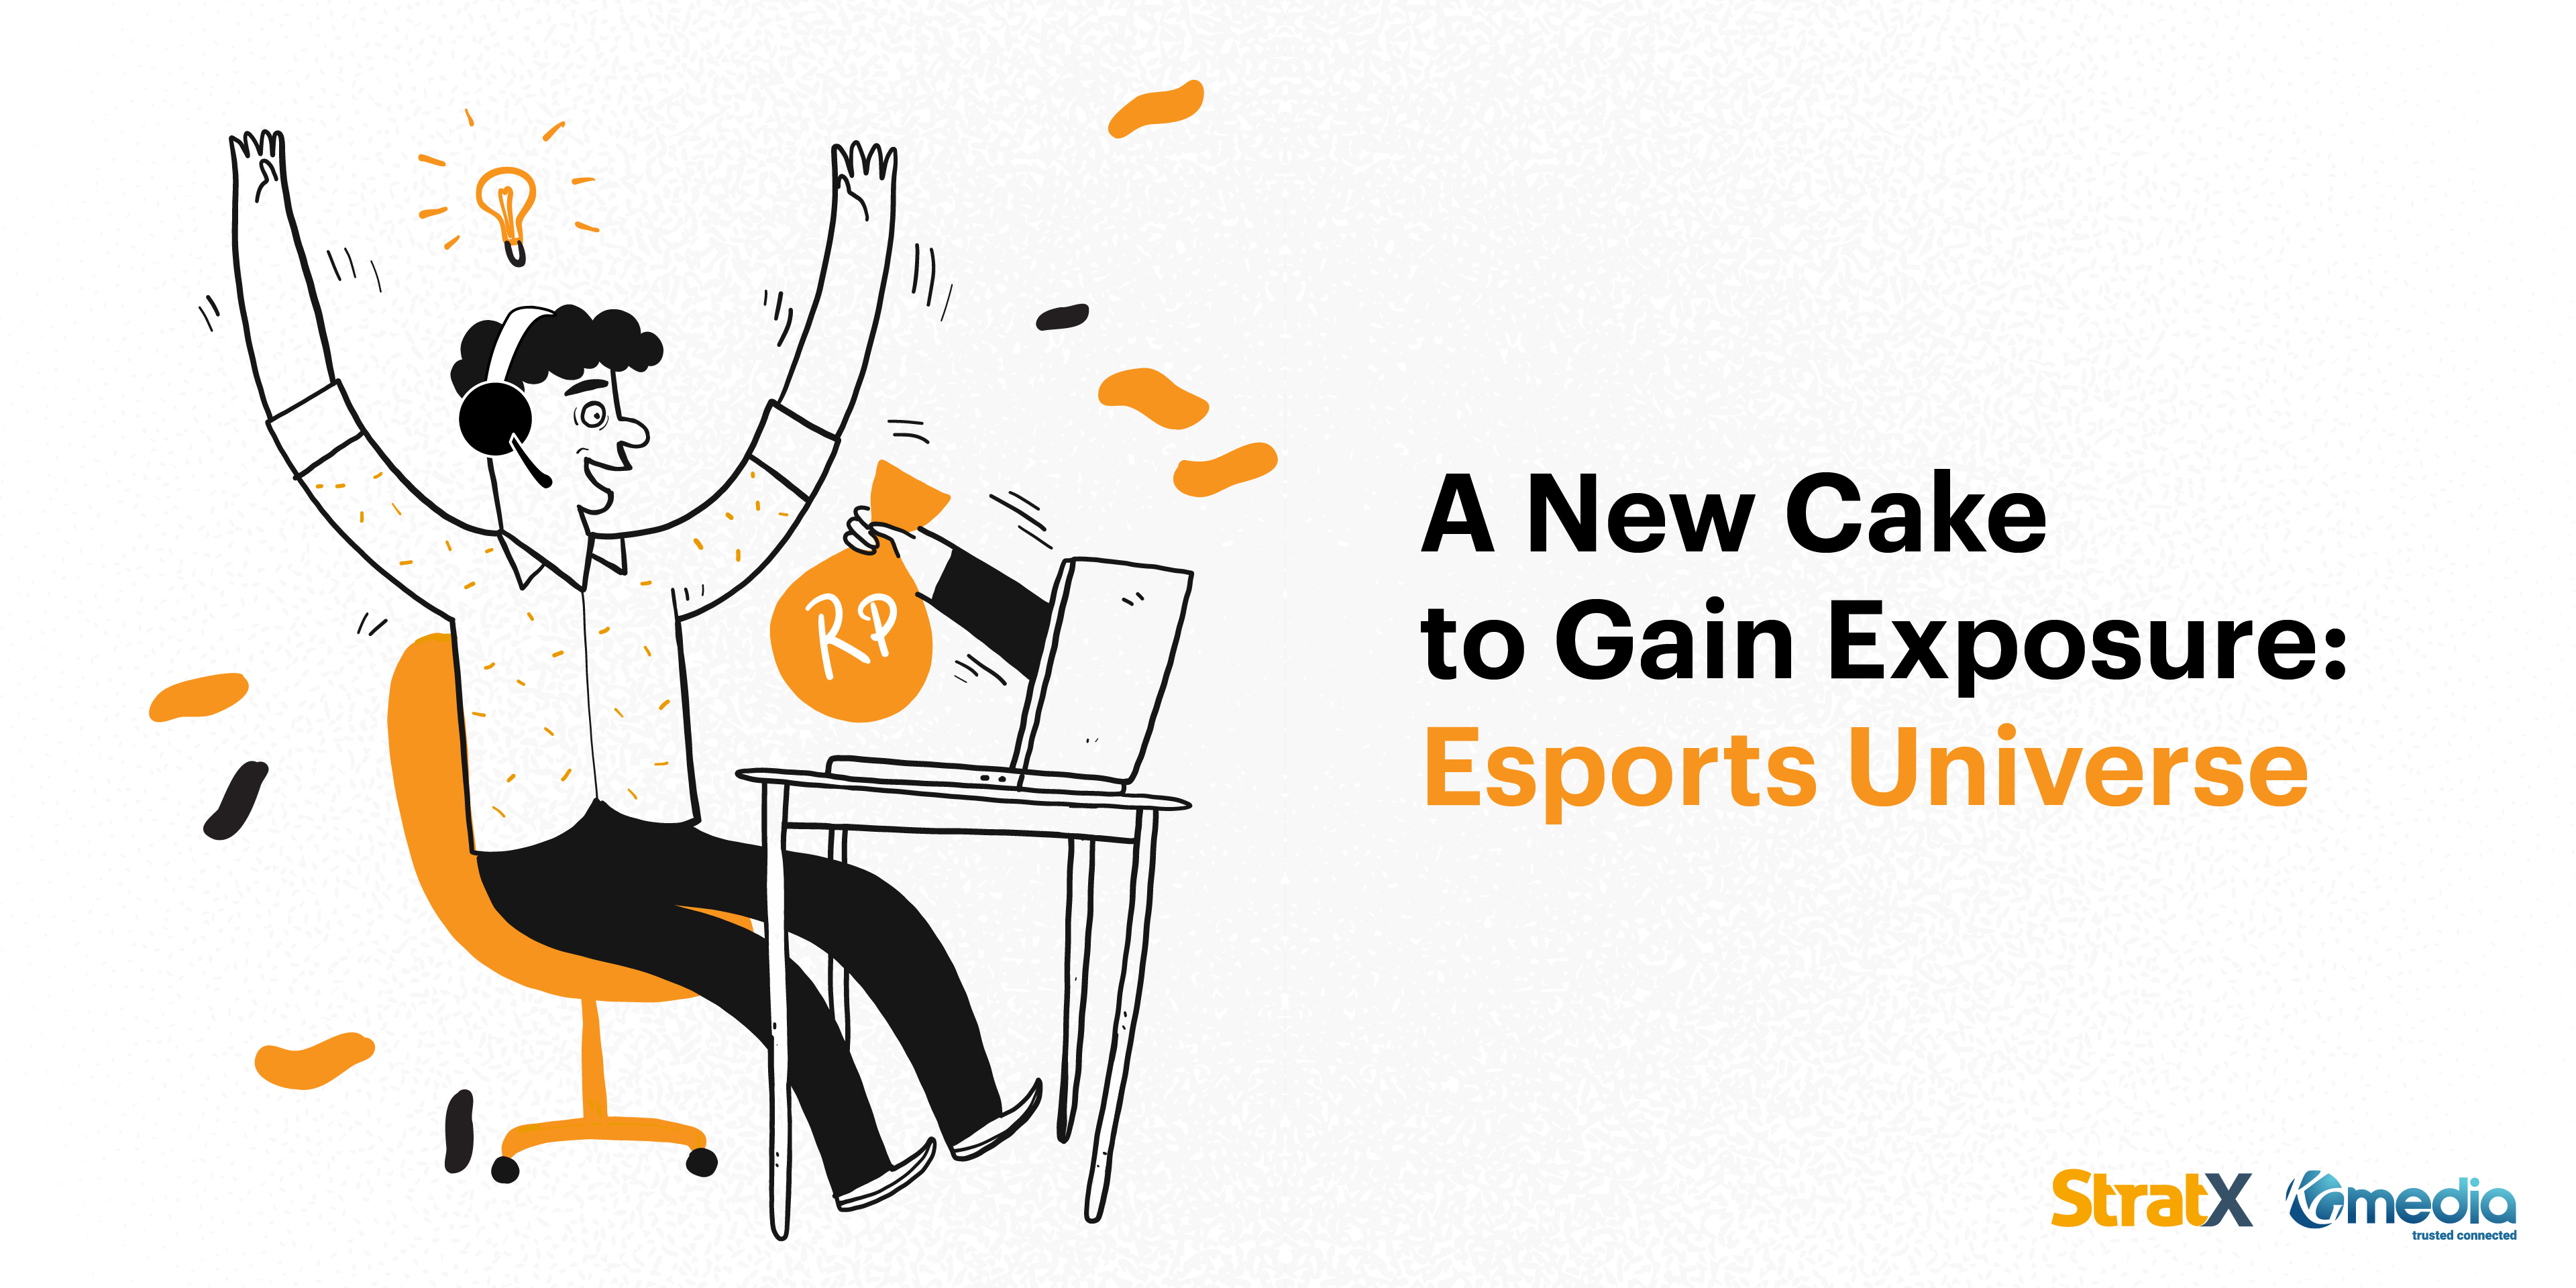 esports ecosystem is a new cake from business standpoint